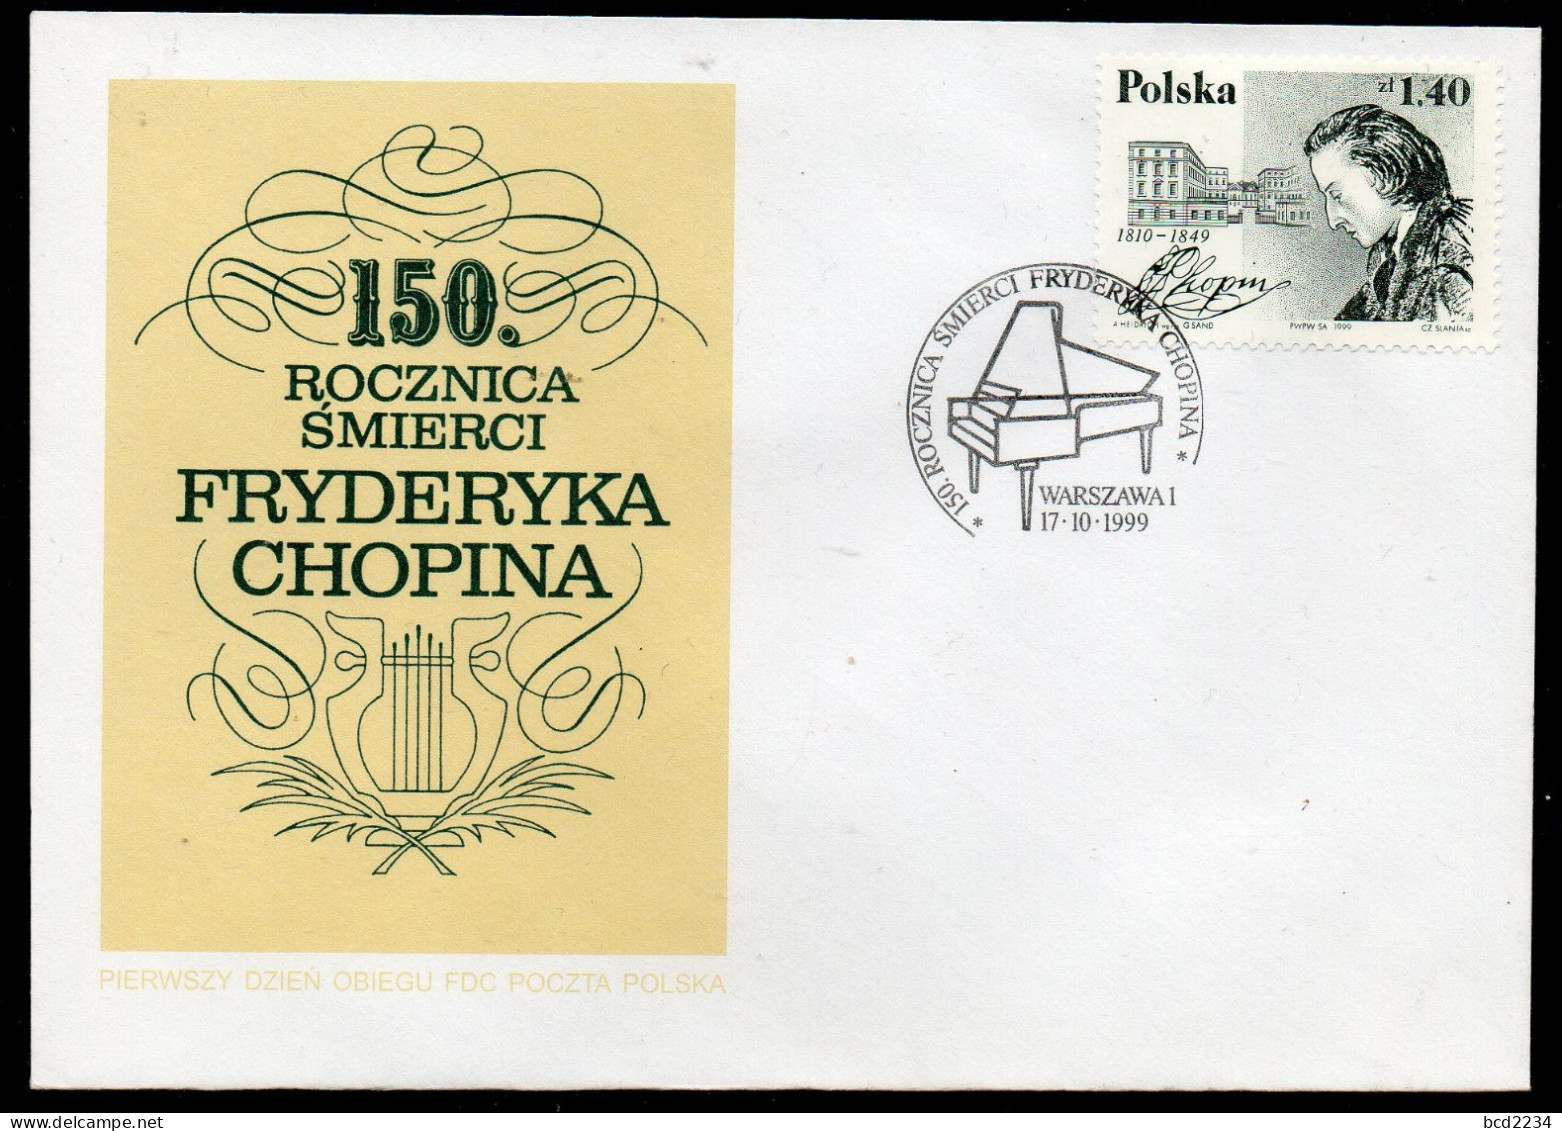 POLAND FRANCE SLANIA 1999 CHOPIN JOINT ISSUE FDC 150TH DEATH ANNIVERSARY COMPOSERS MUSIC PIANO POLISH FRENCH - Musique